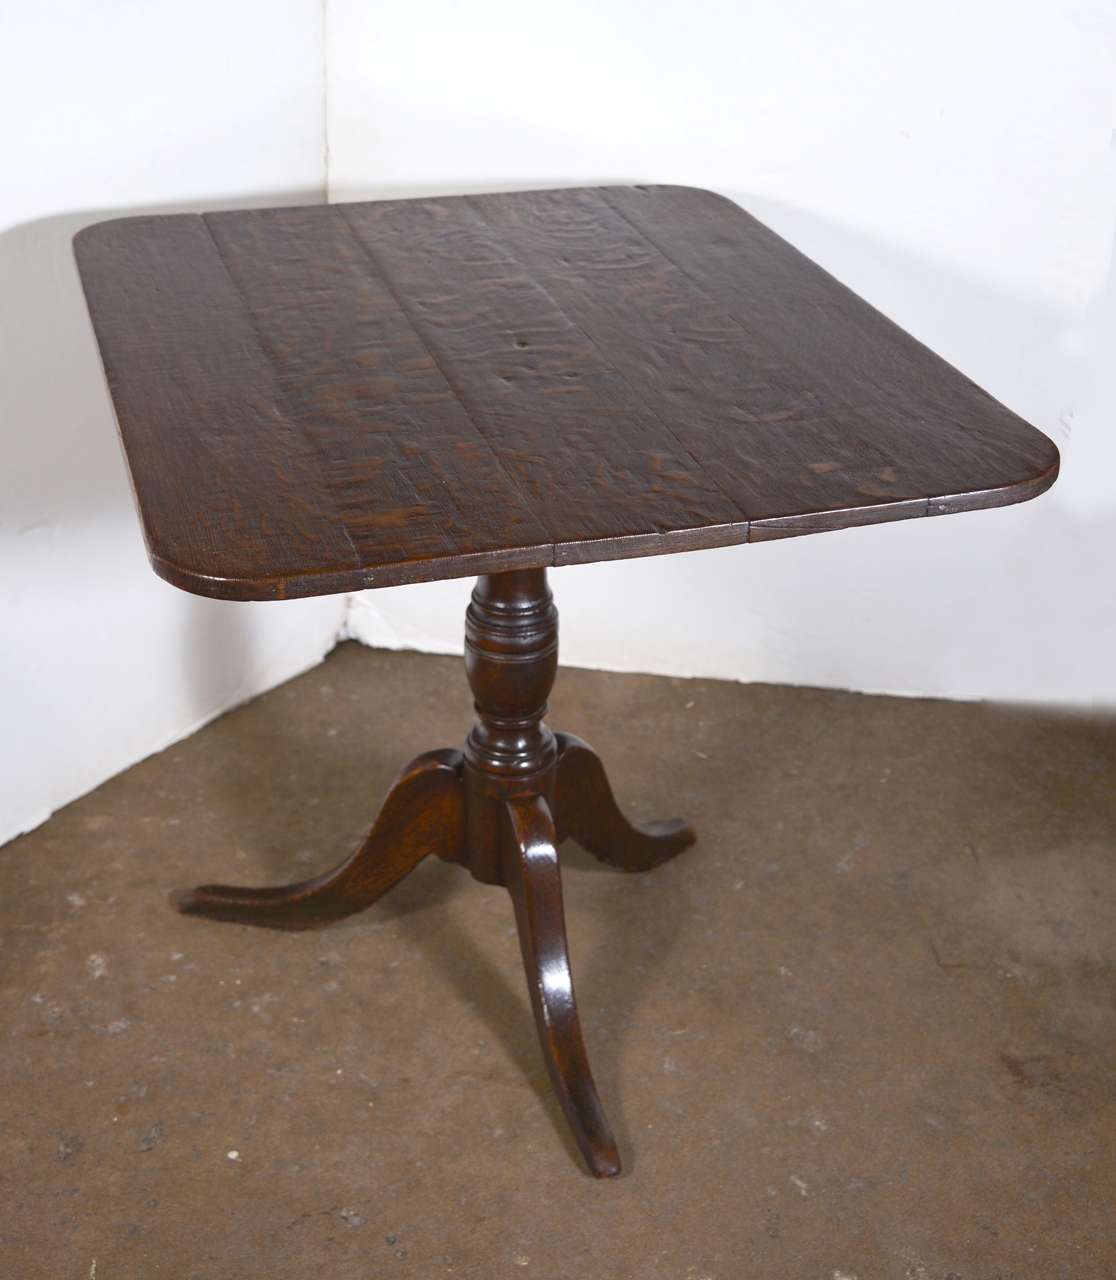 19th century English oak rectangular tilt-top table on a turned base with tripod legs. Can be tilted up with original hardware.